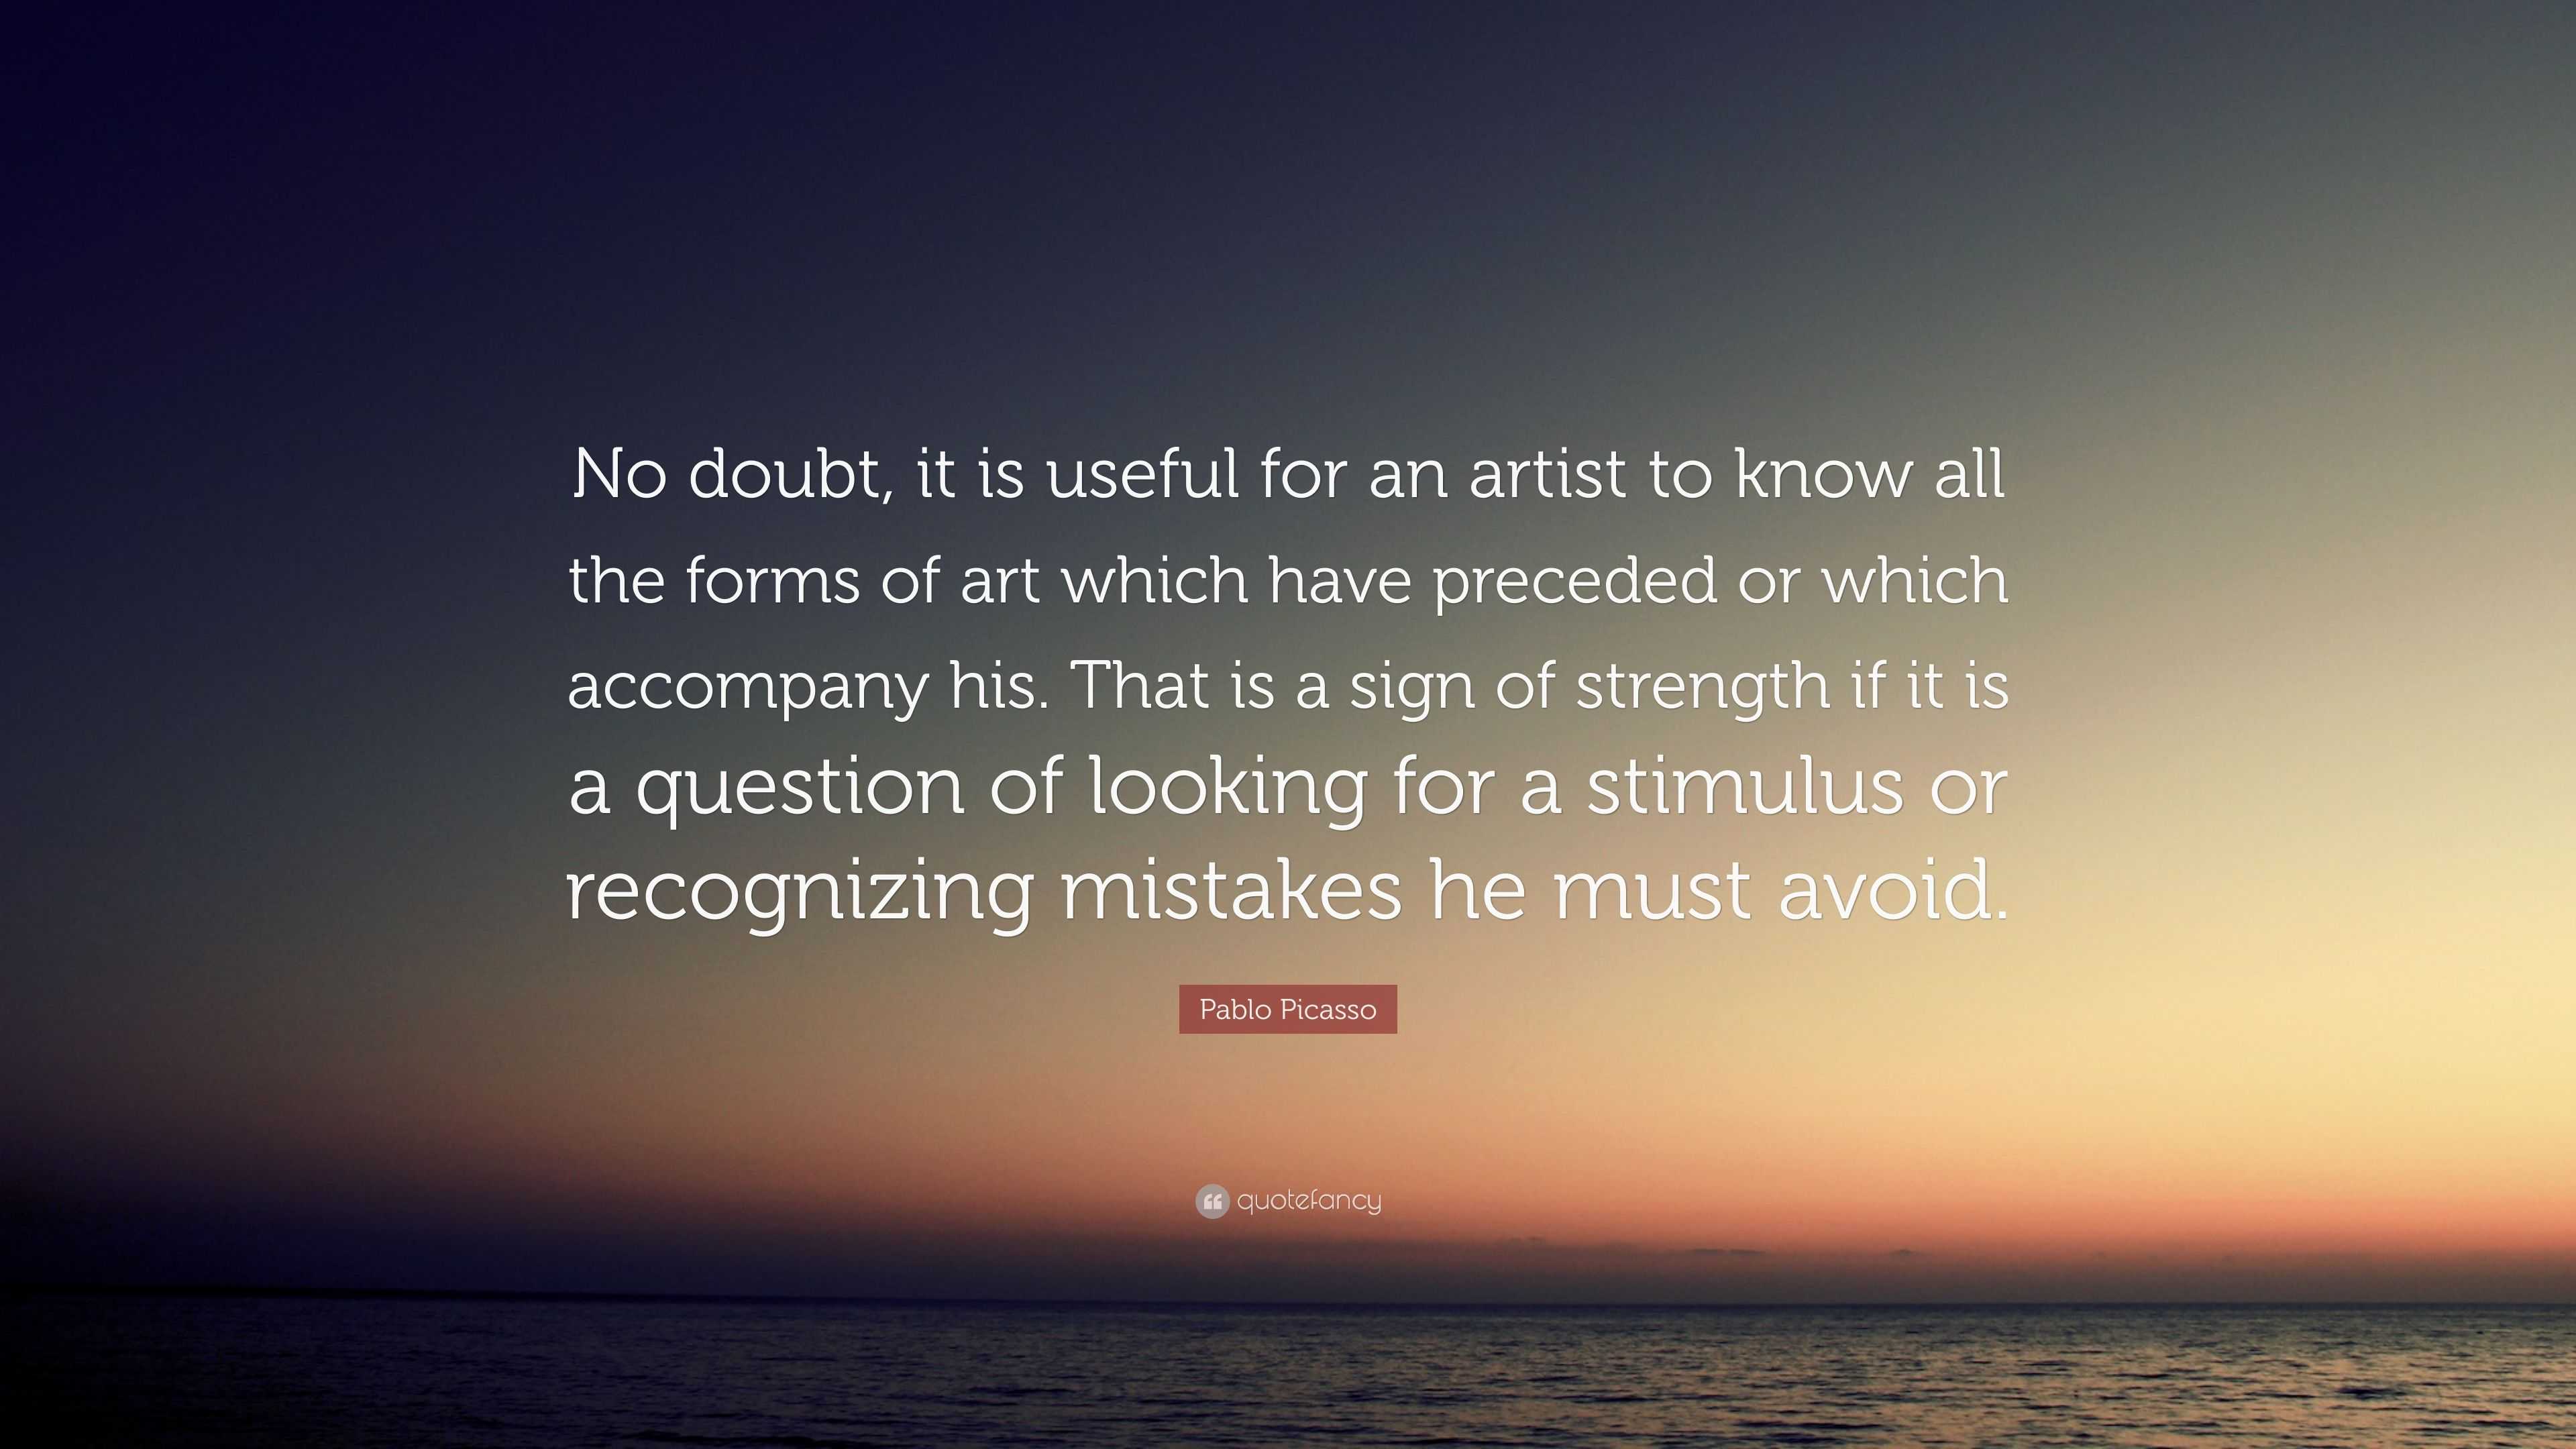 Pablo Picasso Quote: “No doubt, it is useful for an artist to know all ...